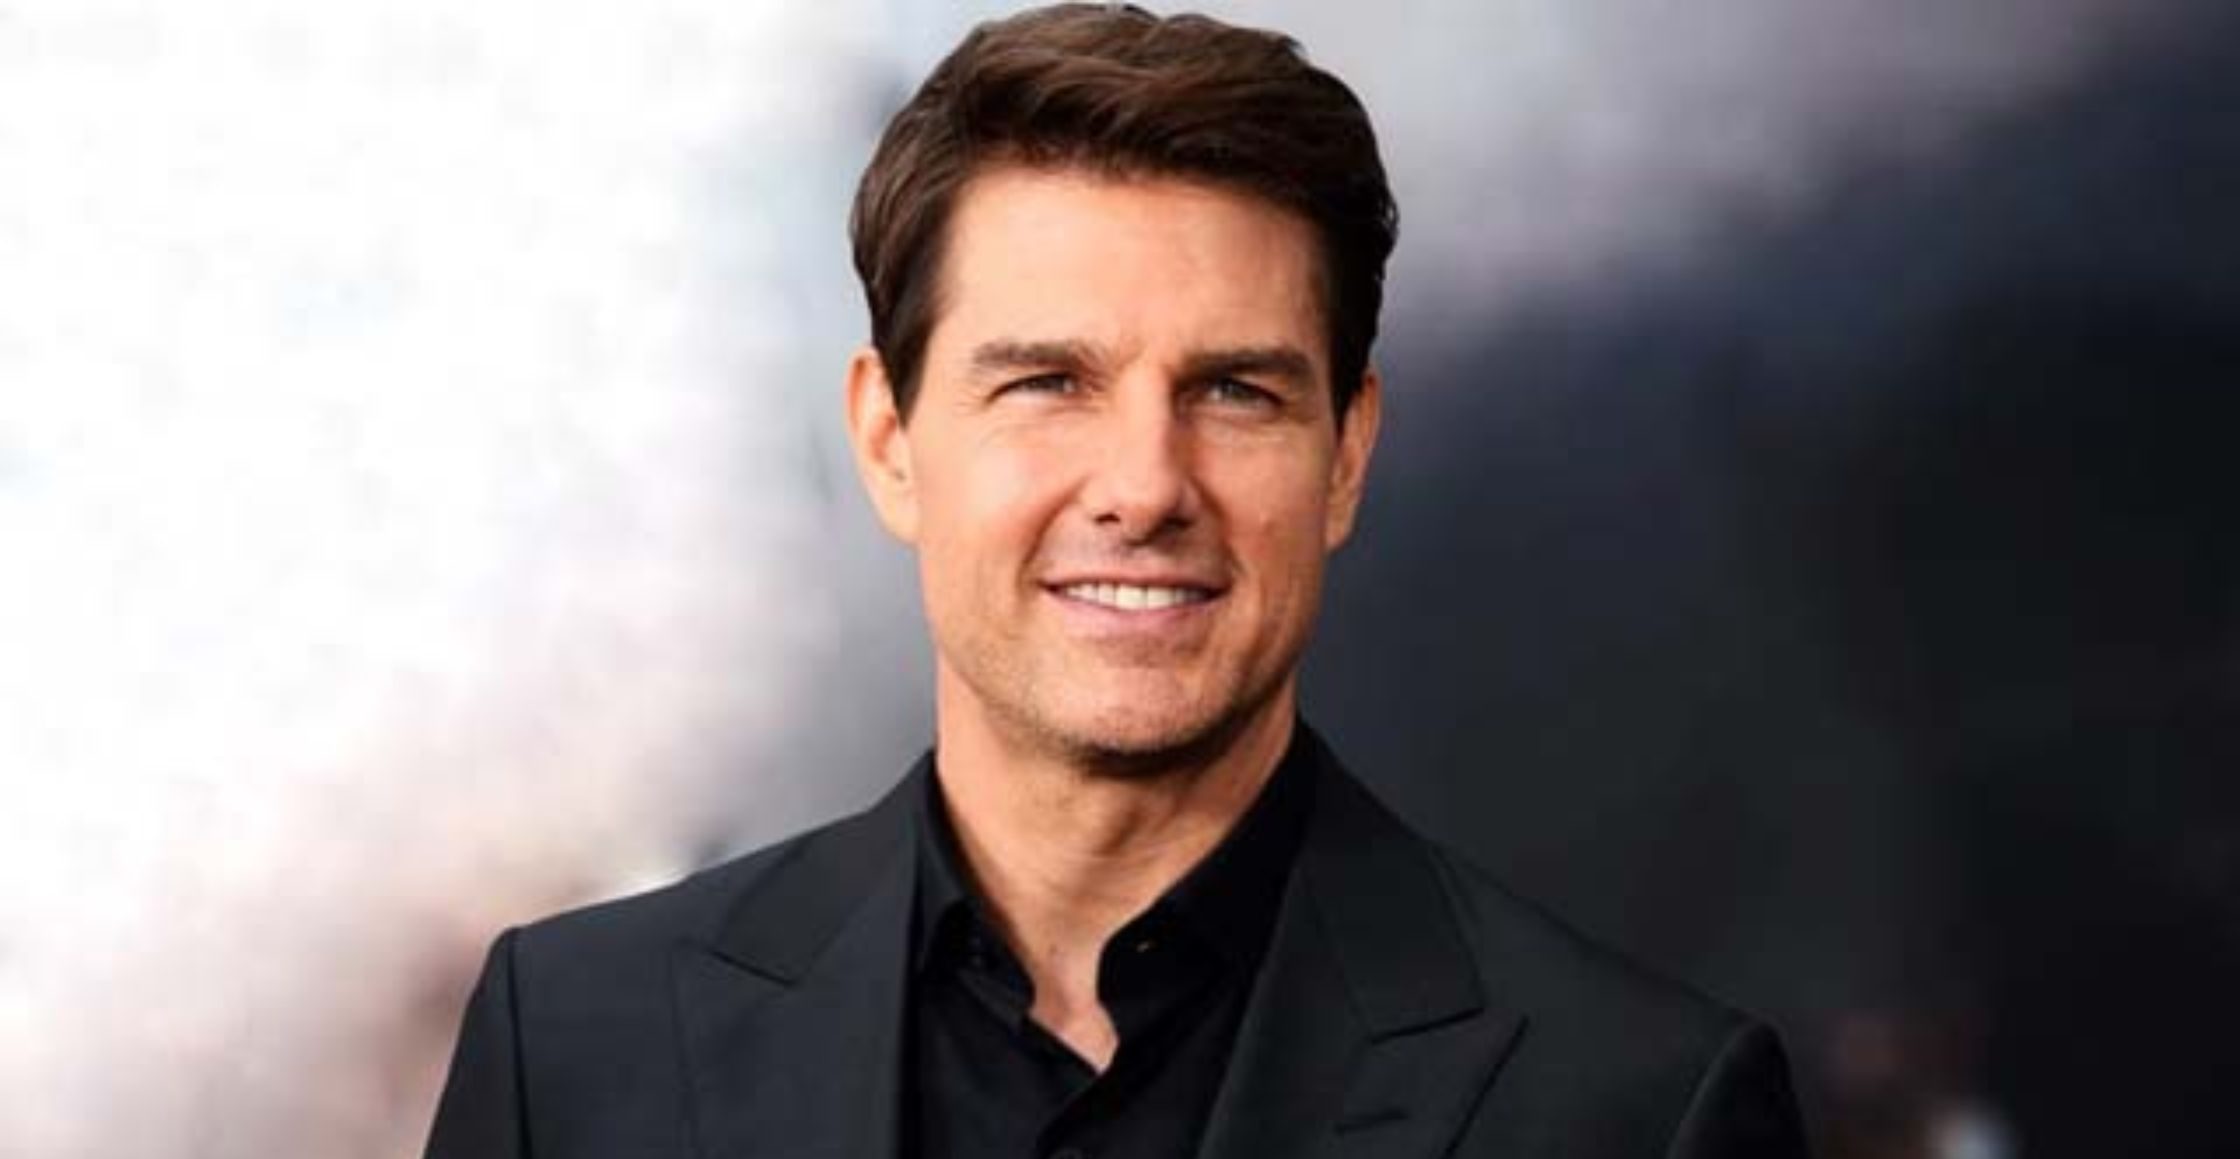 Tom Cruise Net Worth, Age, Height, Family, Movies, Biography